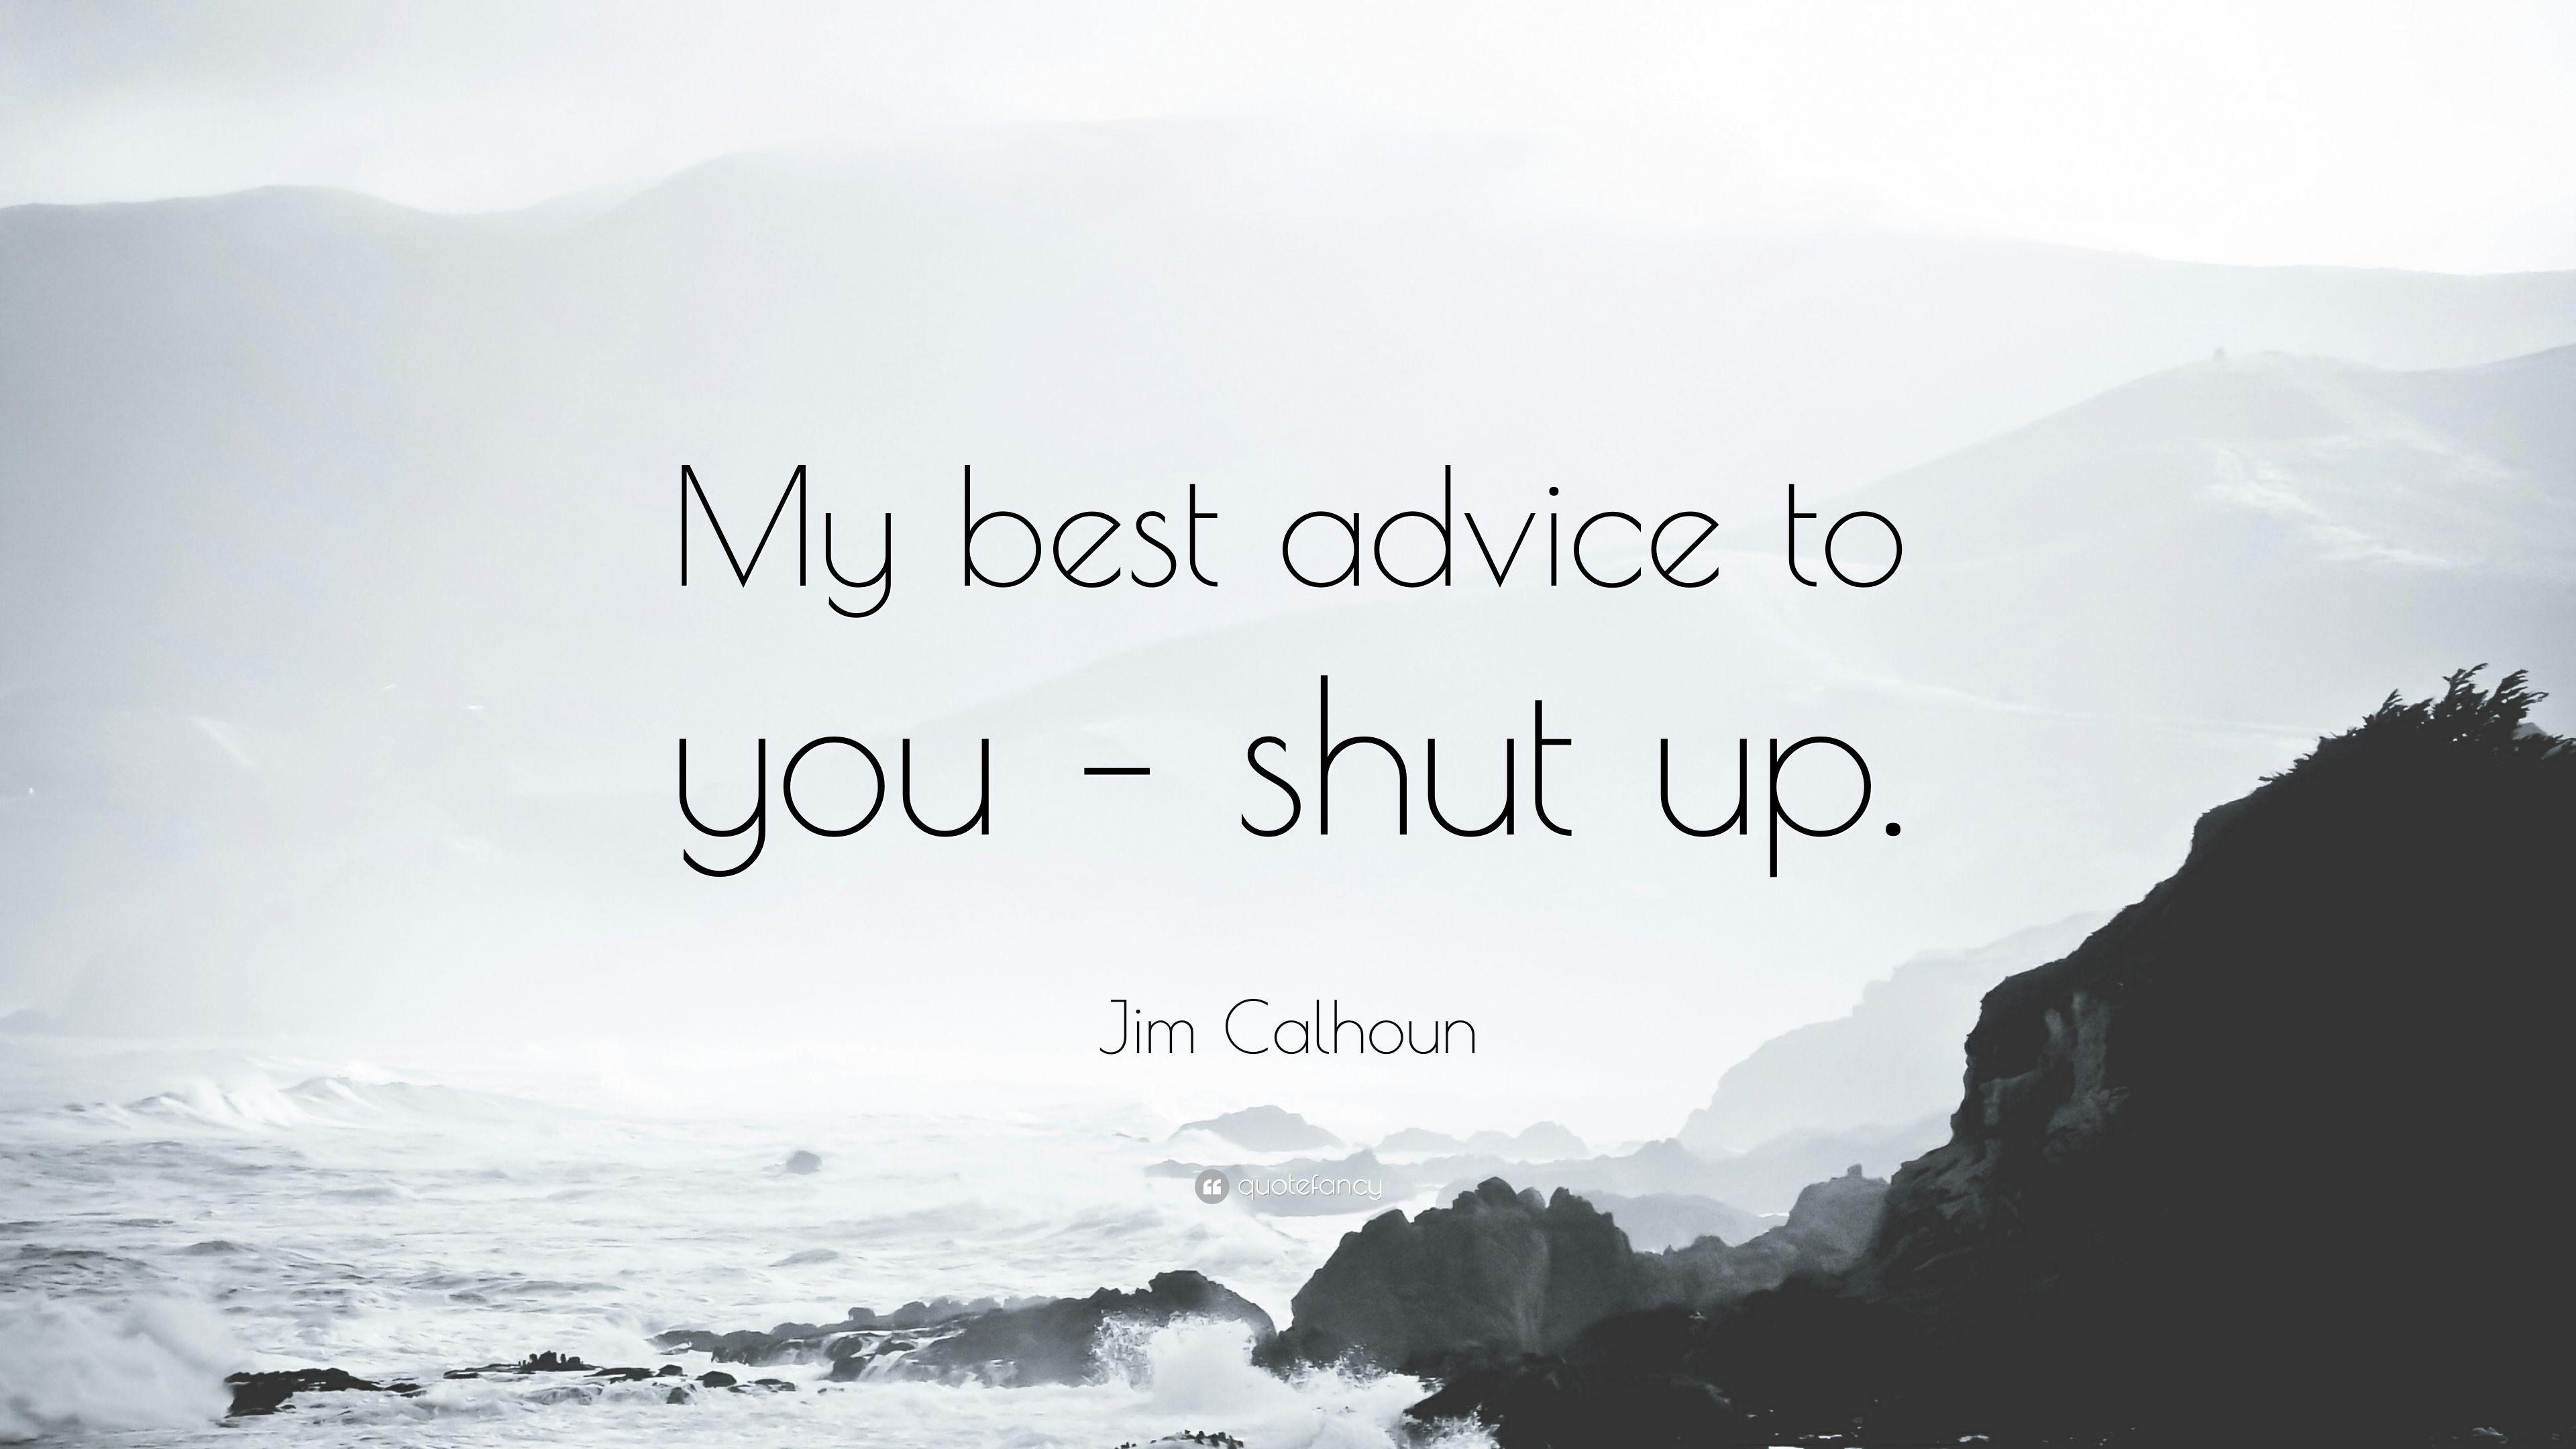 Jim Calhoun Quote: “My best advice to you